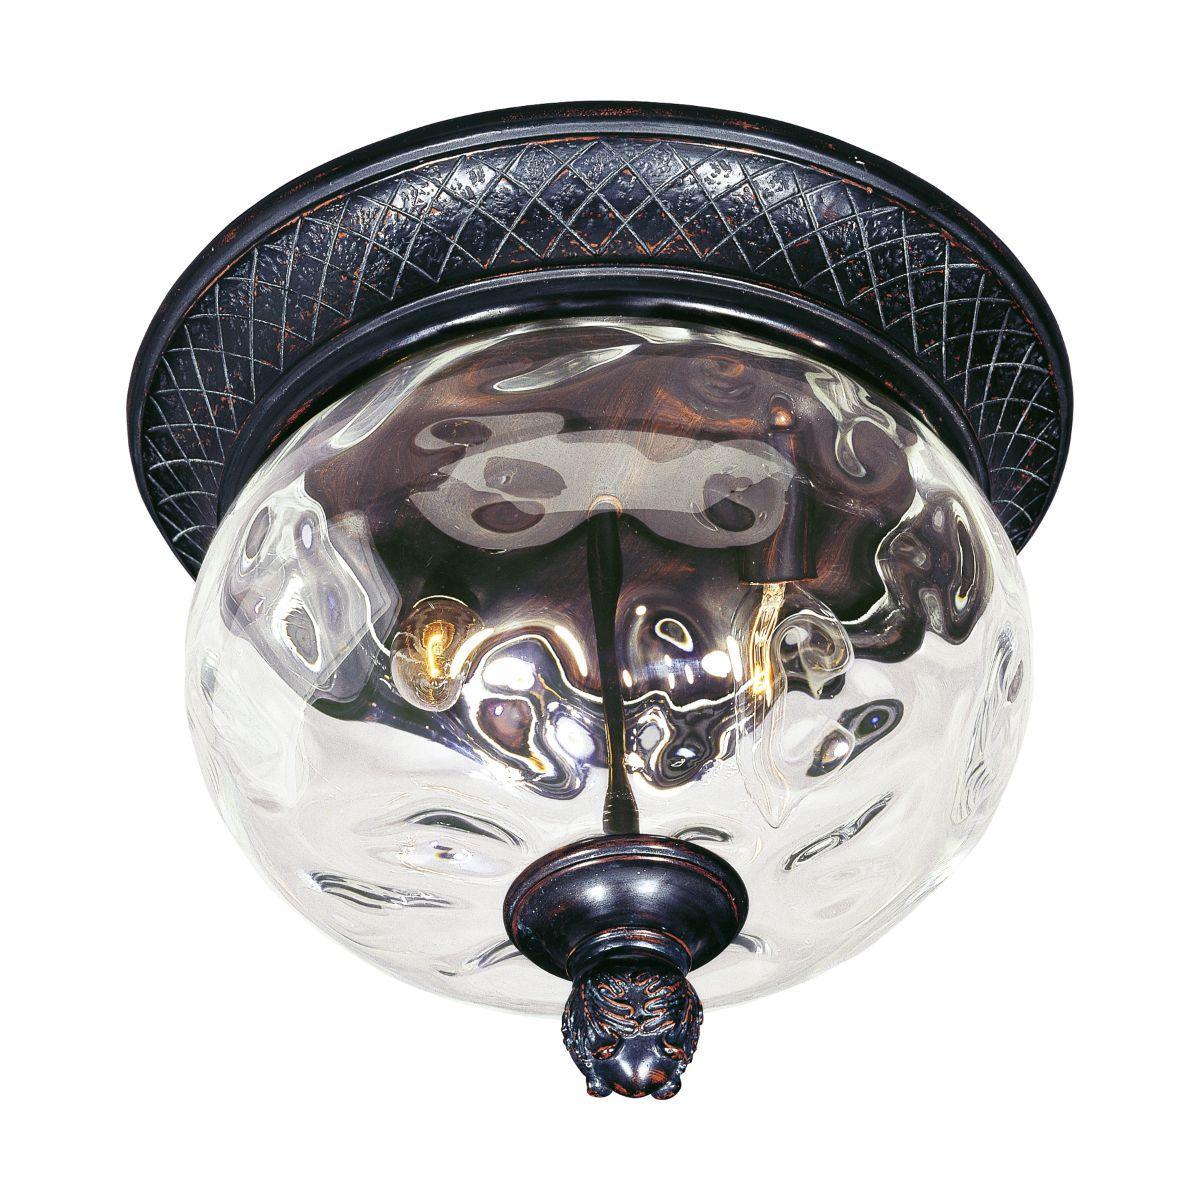 Carriage House VX 12 in. 2 Lights Outdoor Flush Mount Bronze Finish